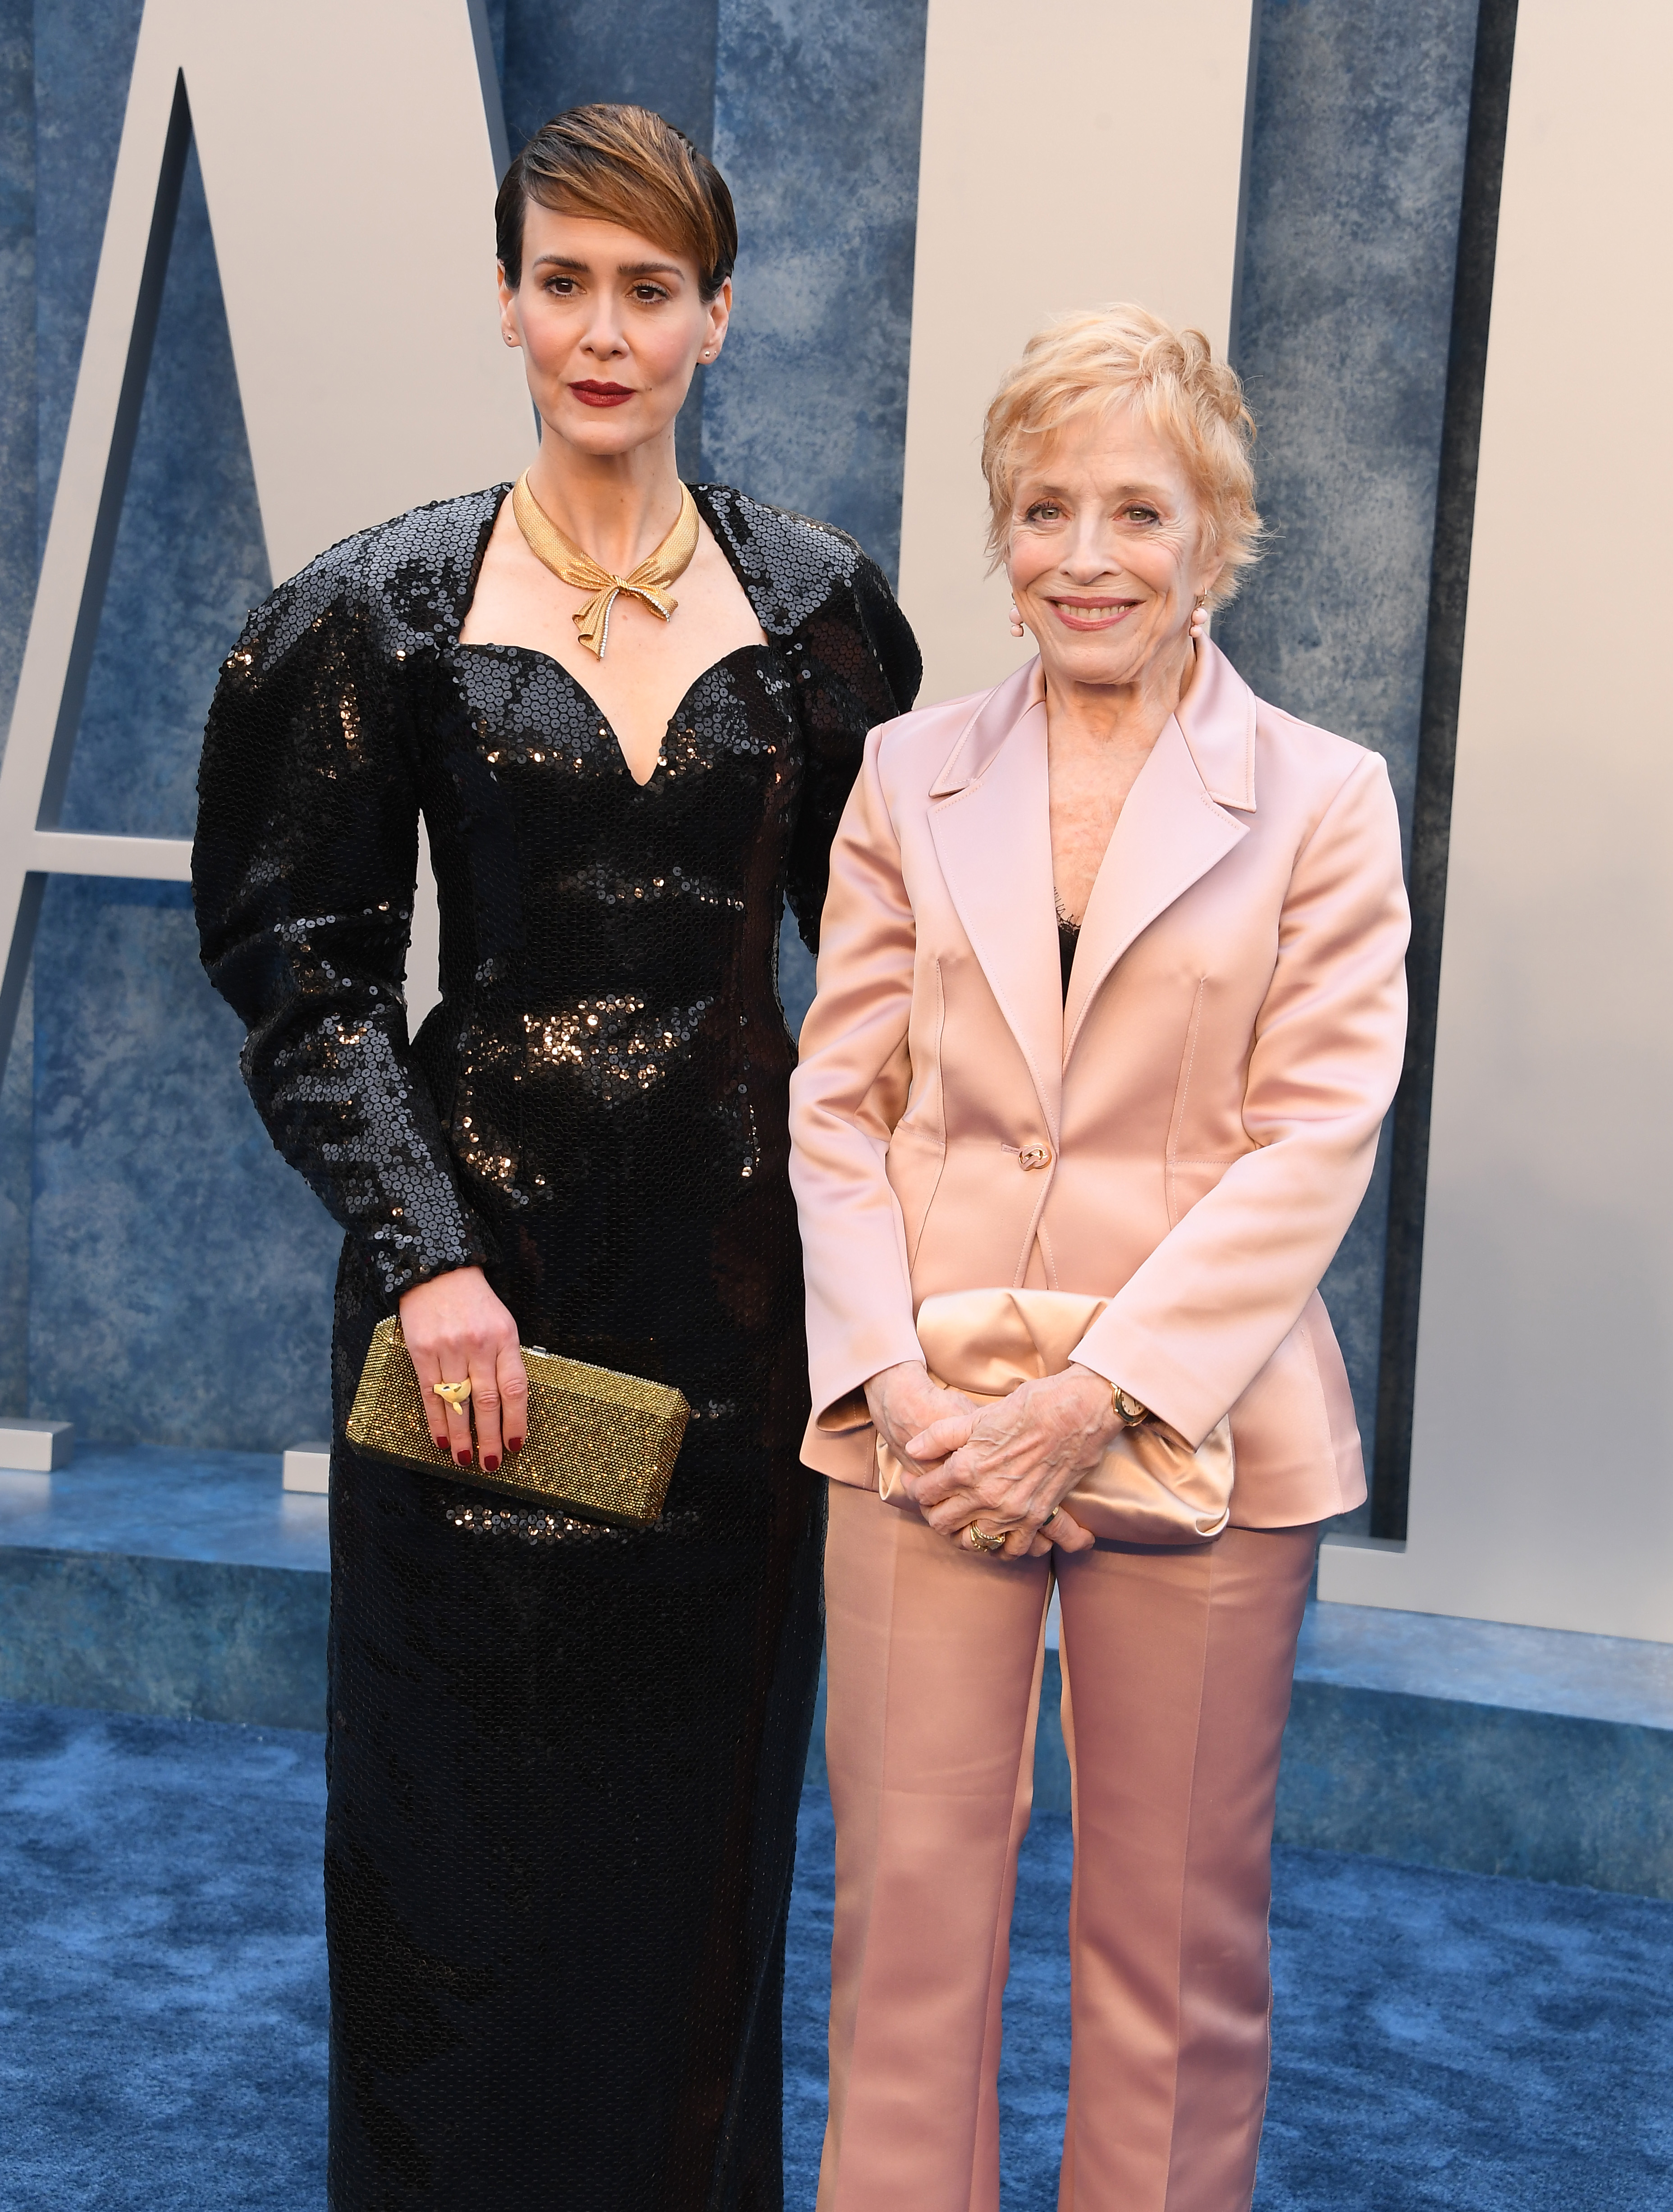 Sarah Paulson and Holland Taylor at the Vanity Fair Oscar Part on March 12, 2023, in Beverly Hills, California. | Source: Getty Images